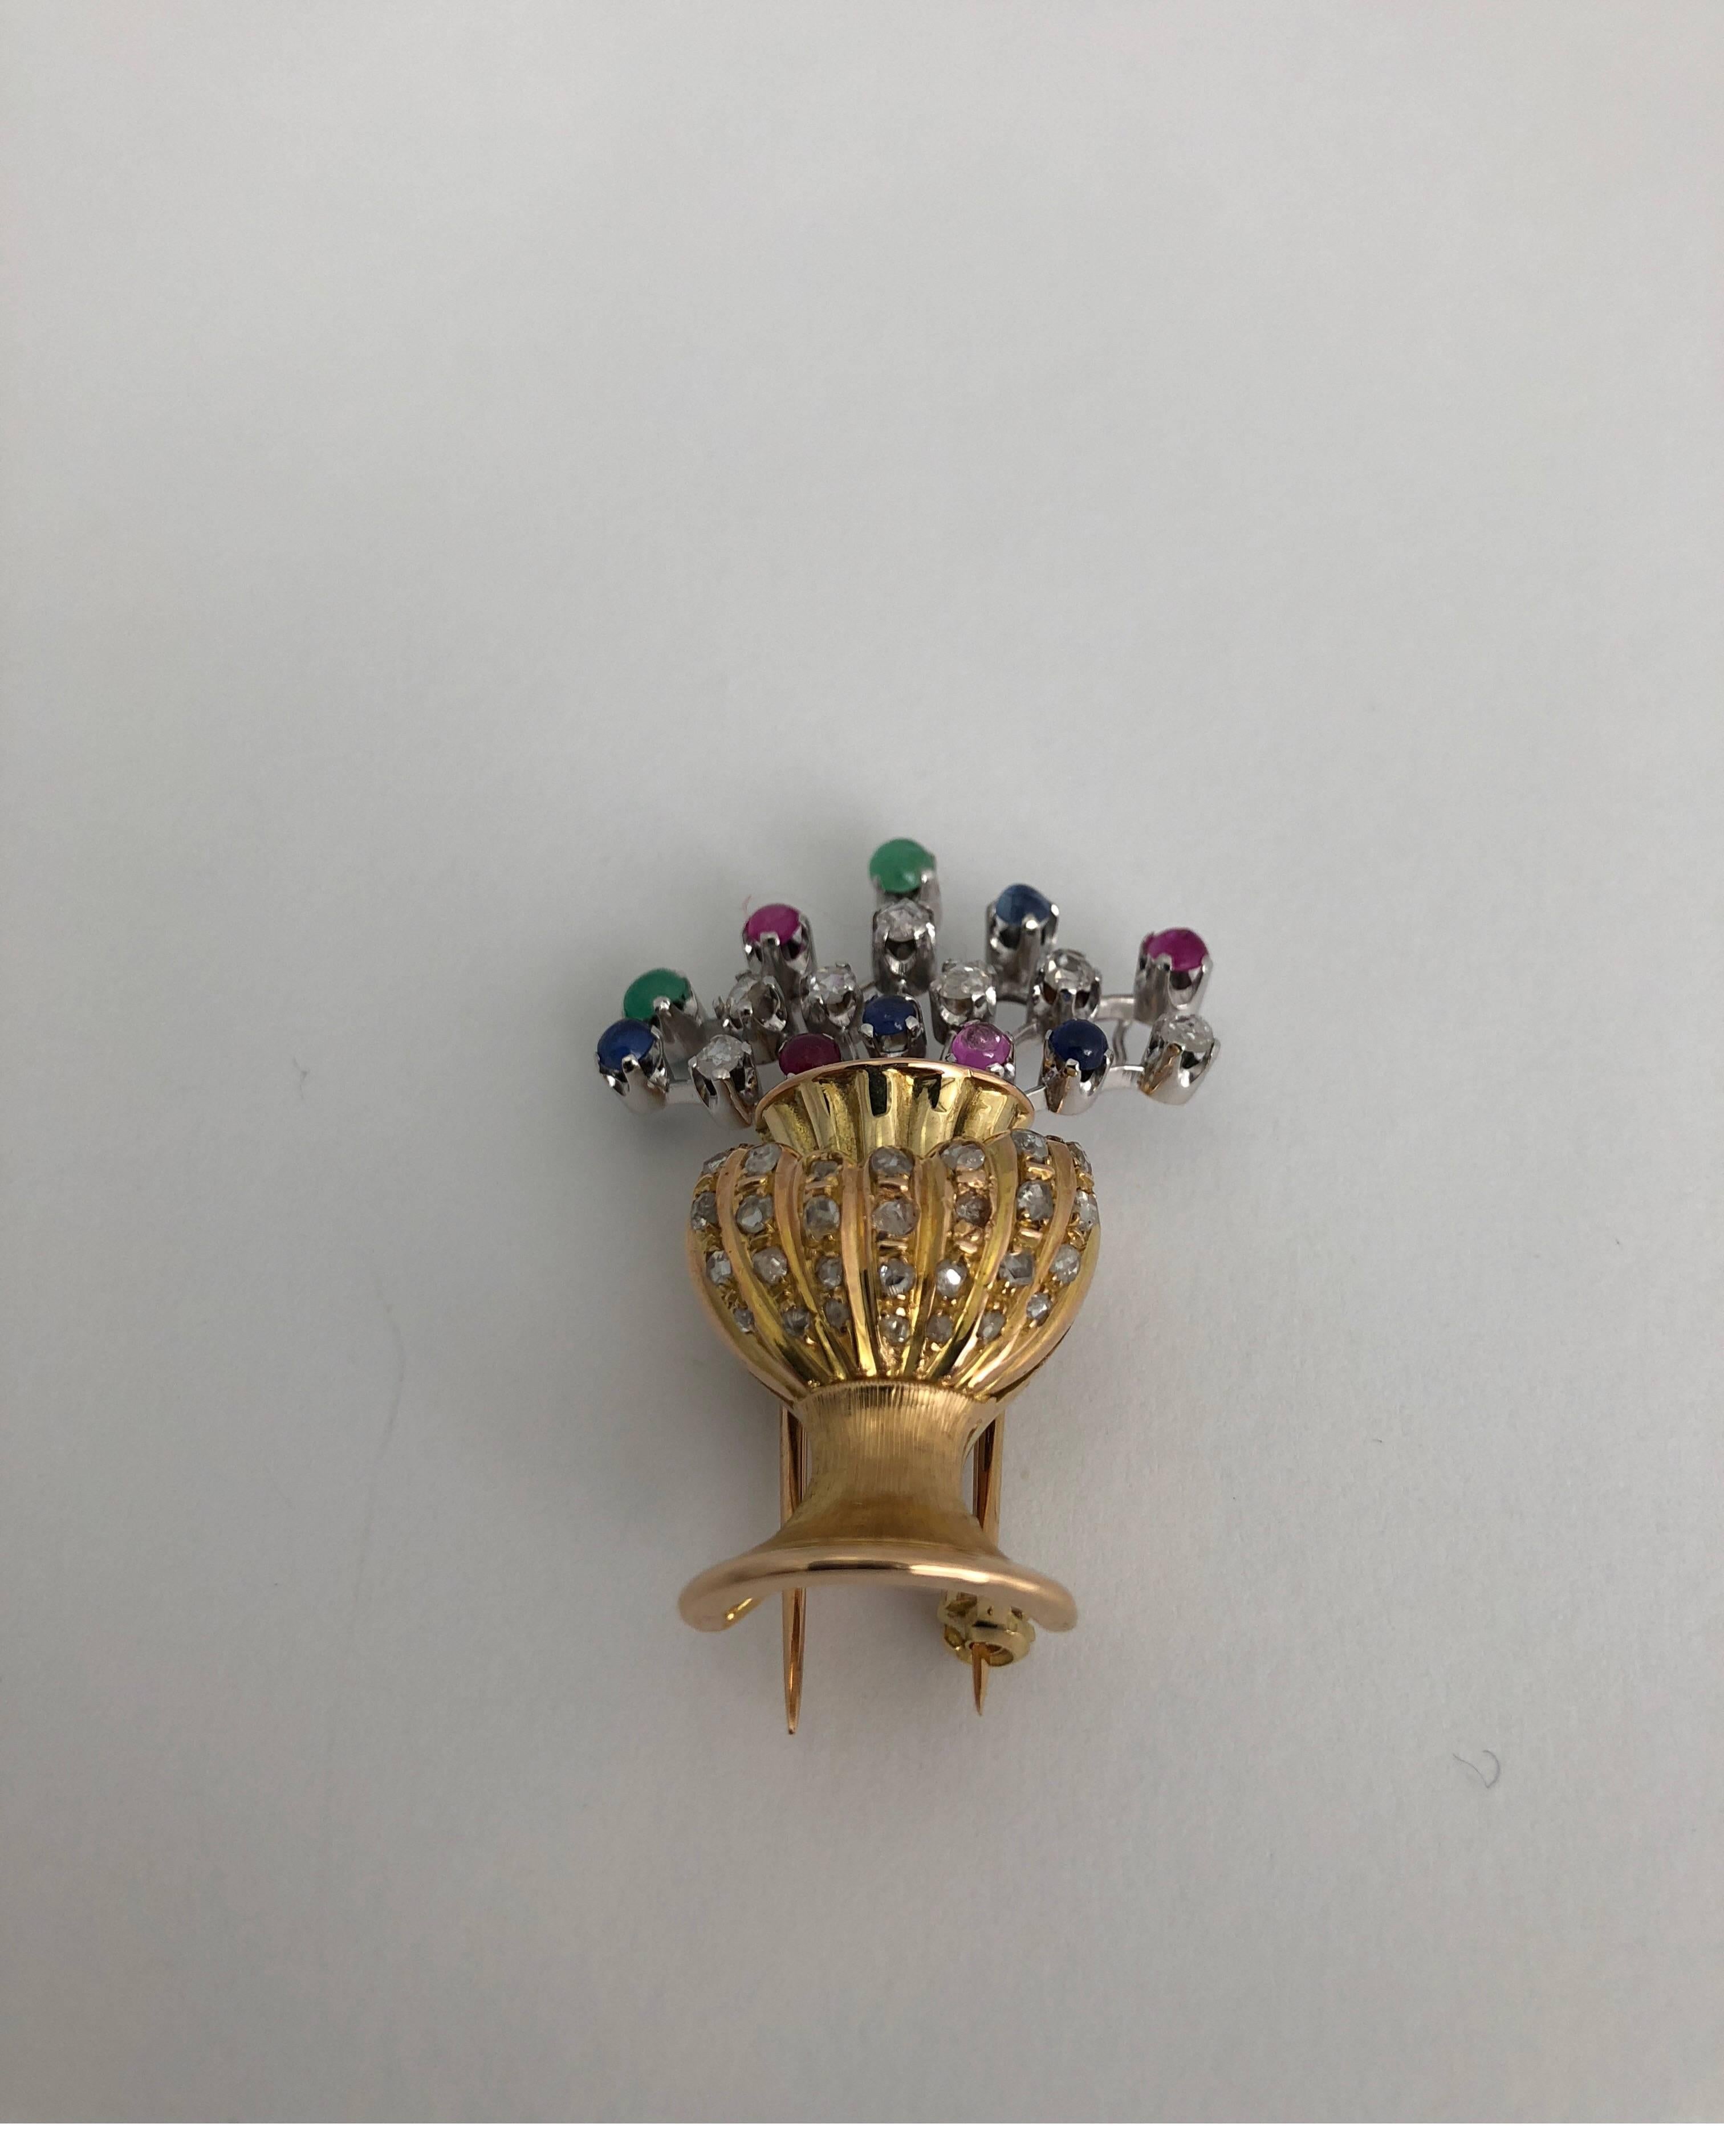 Floral vase brooch in yellow gold and and gemstones
total weight of gold 18 kt gold gr 14.80
total wieght of white diamonds ct 0.77 OLD CUT
total weight of  2 emeralds ct 0.18
total weight of 4 blue saphire ct 0.42
total weight of 4 ruby ct